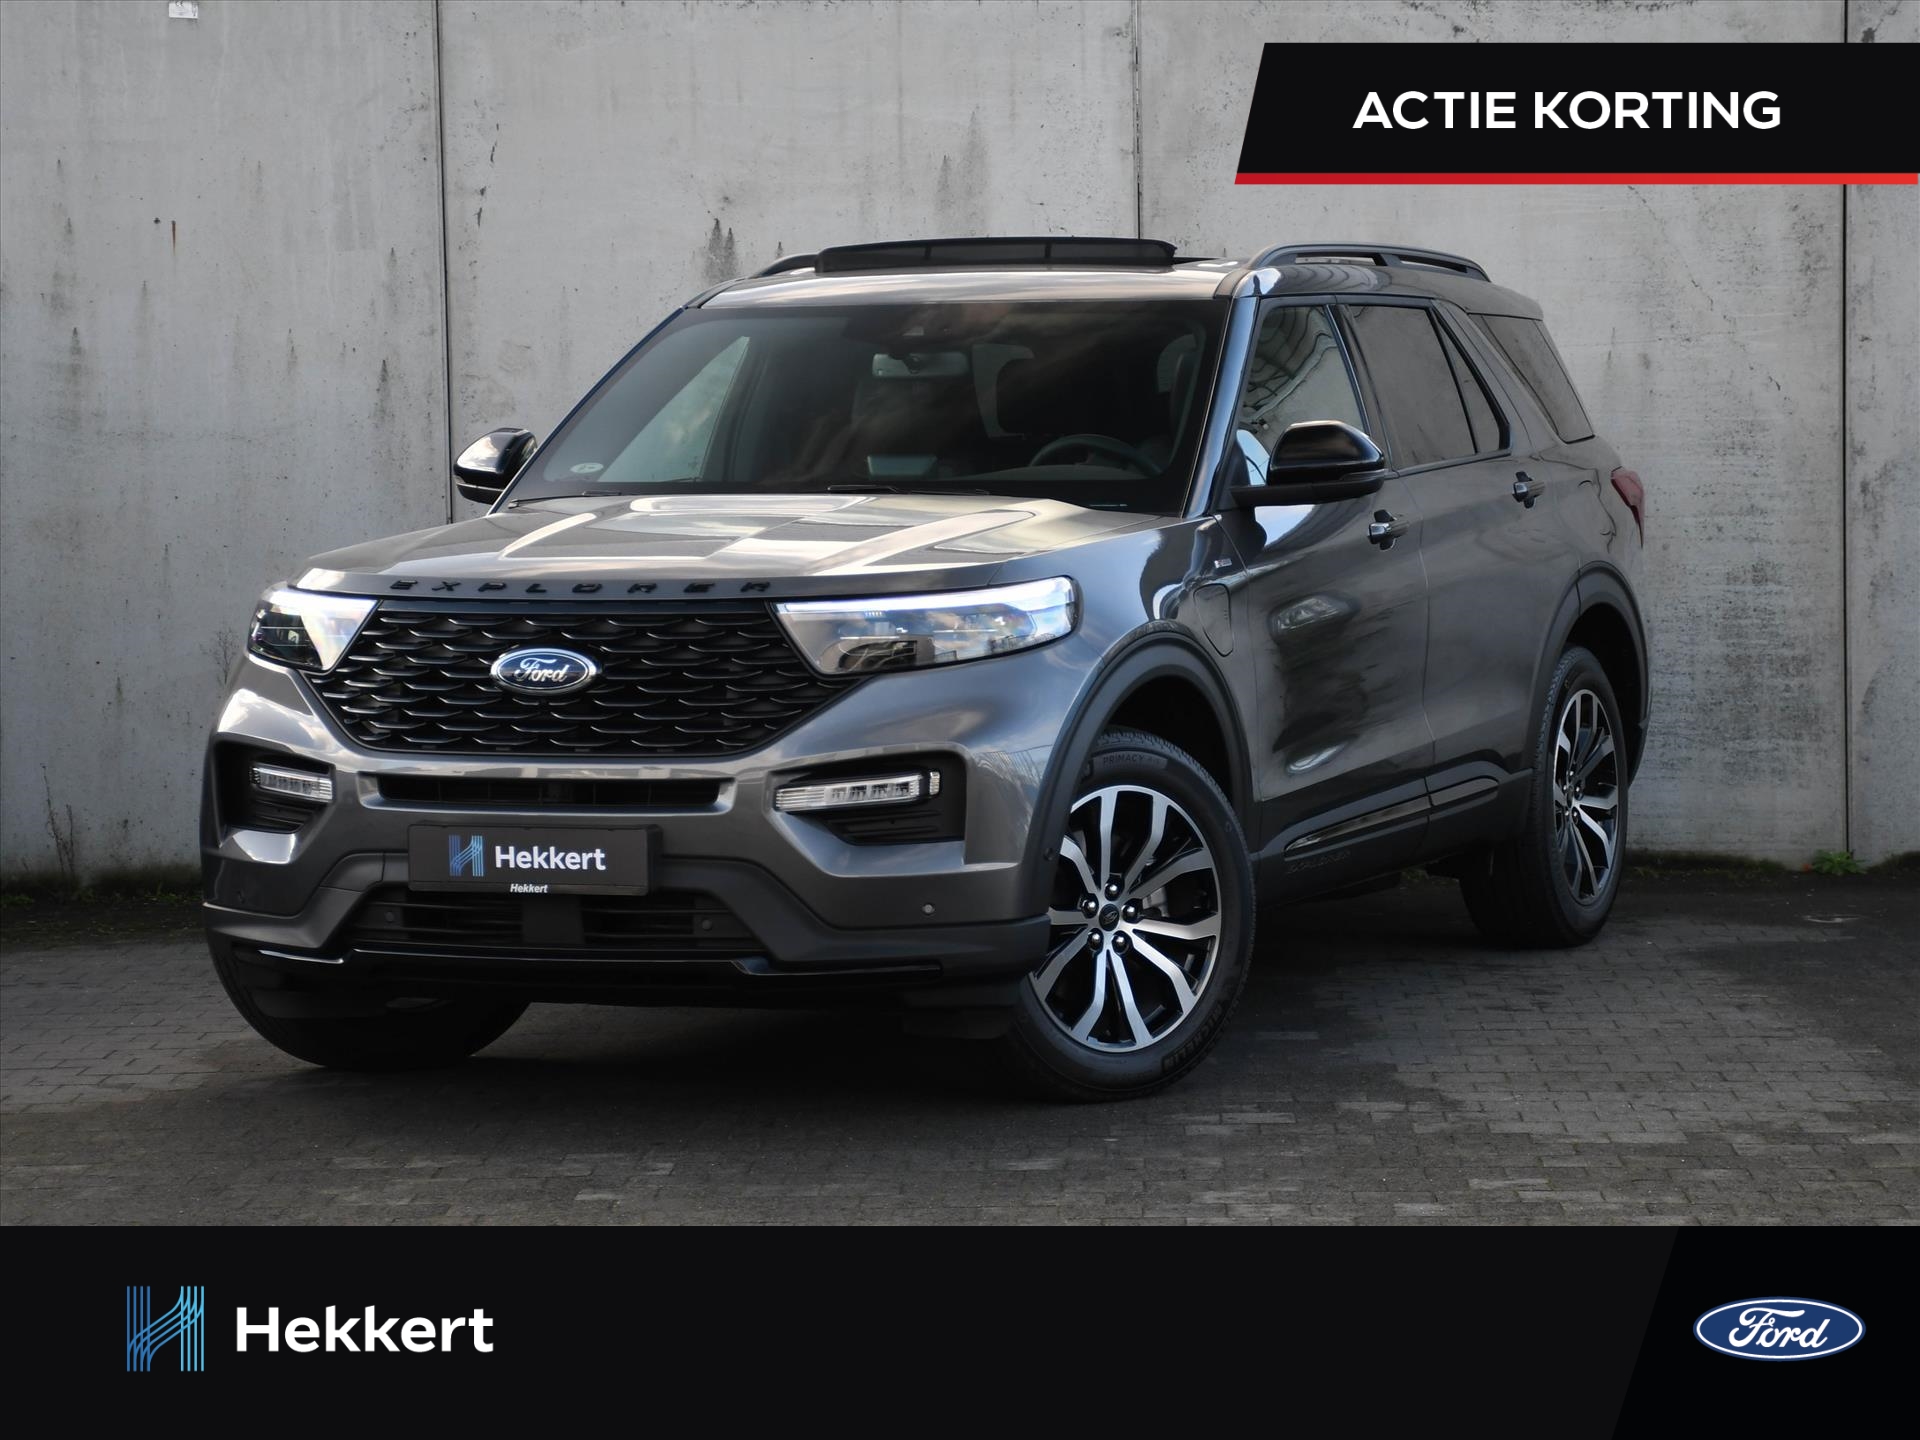 Ford Explorer ST-Line 3.0 V6 EcoBoost PHEV 457pk Automaat 7-Persoons STOELVENTILATIE | PANO-DAK | ADAP. CRUISE | 20''LM | BLIS